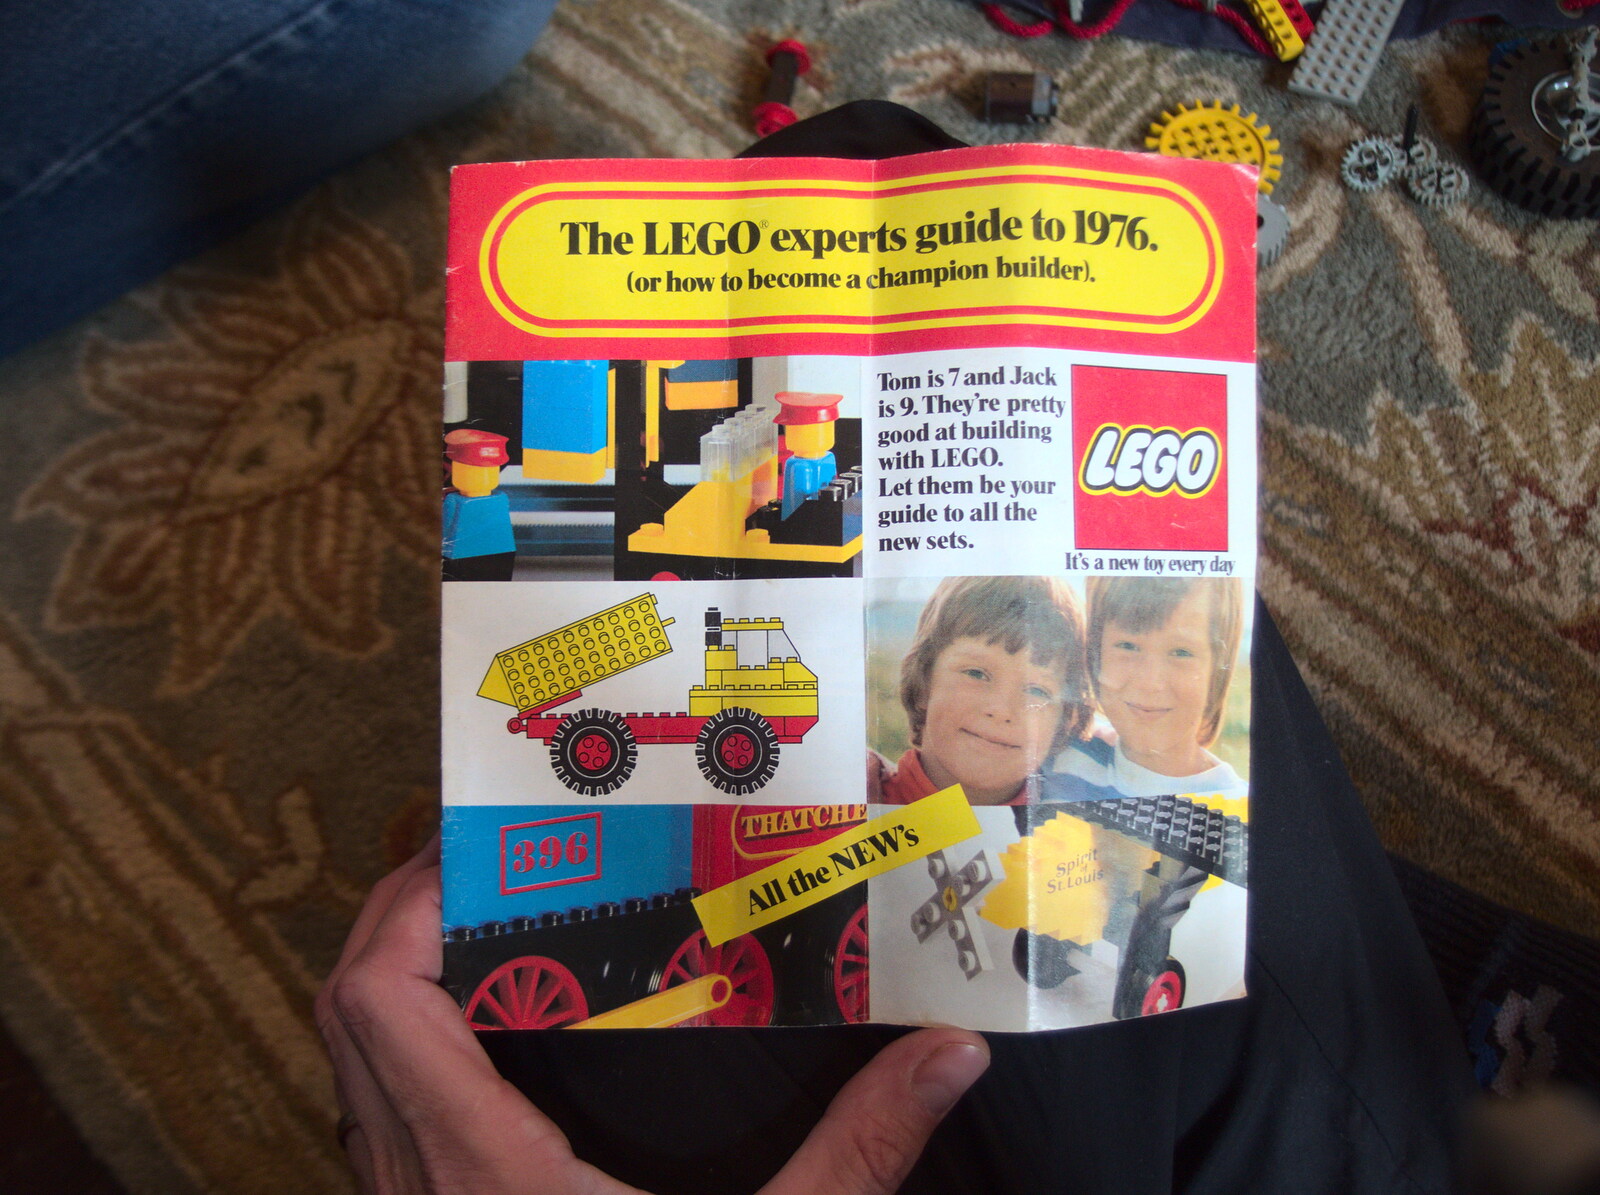 Phil has an large  collection of Lego brochures from A Trip to Short Hills, New Jersey, United States - 20th October 2018